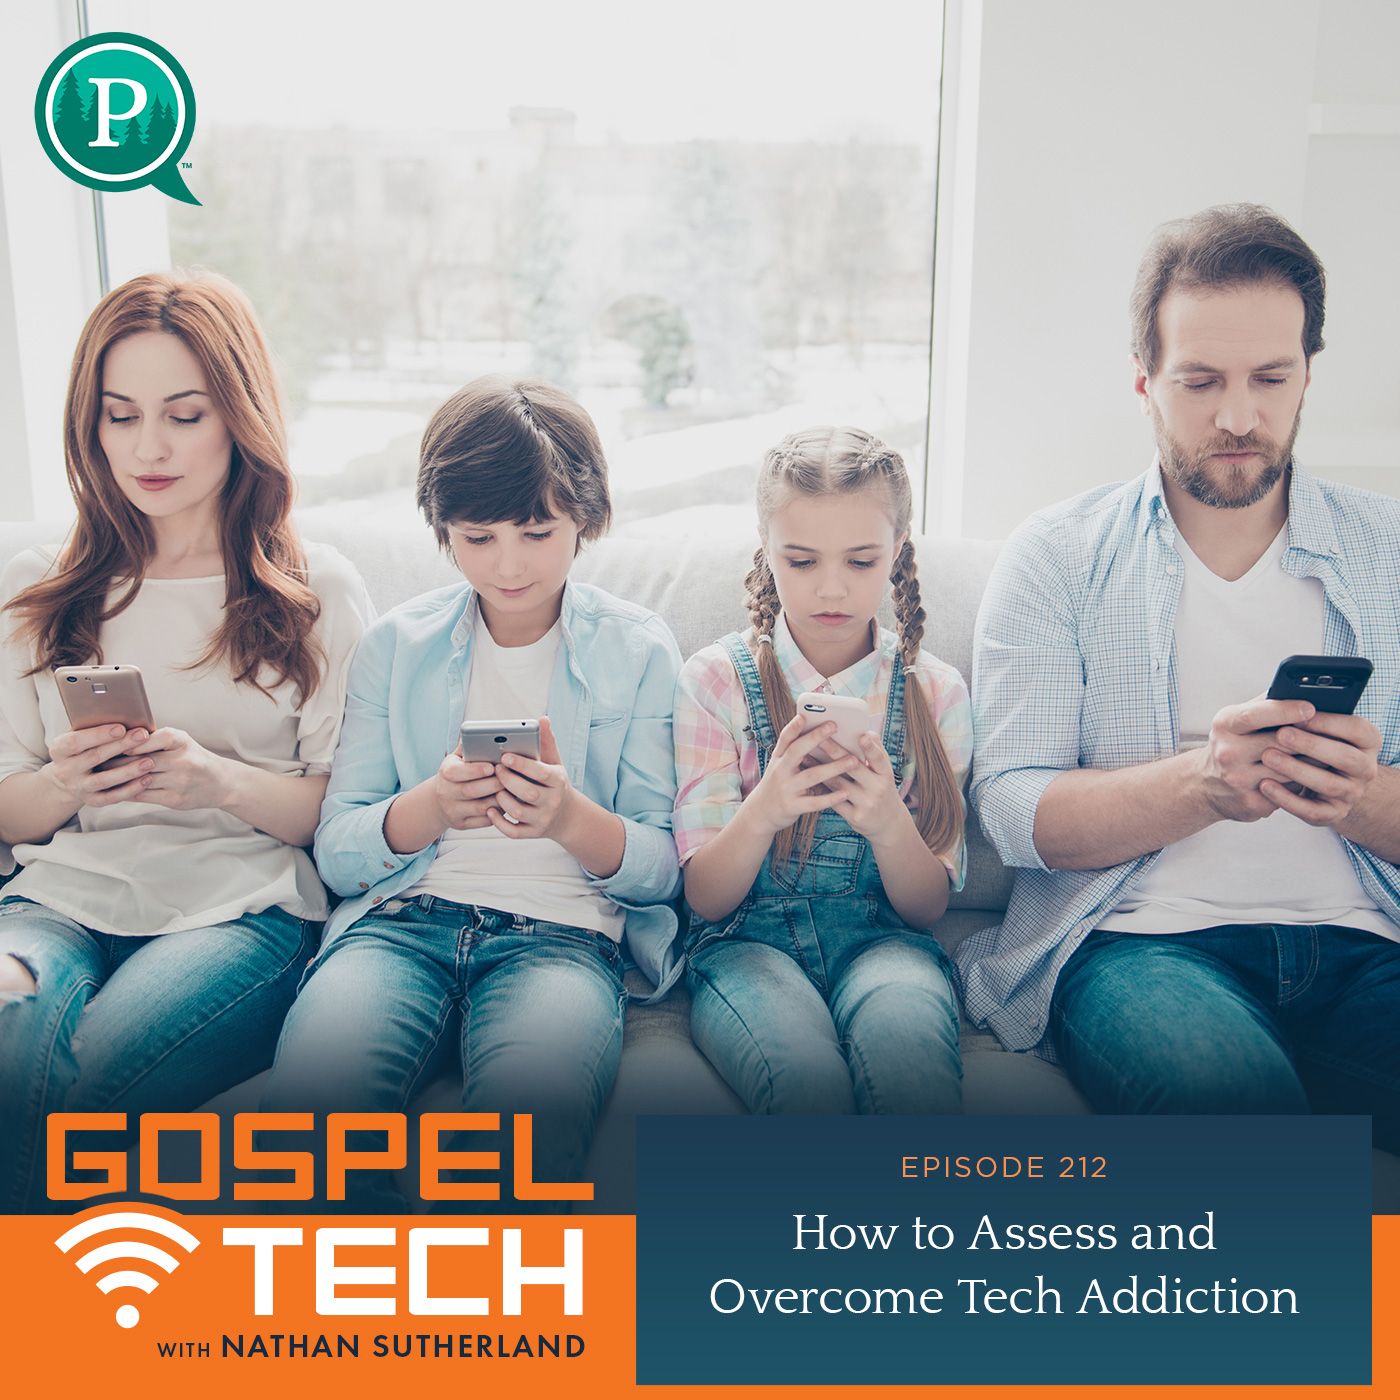 How to Assess and Overcome Tech Addiction